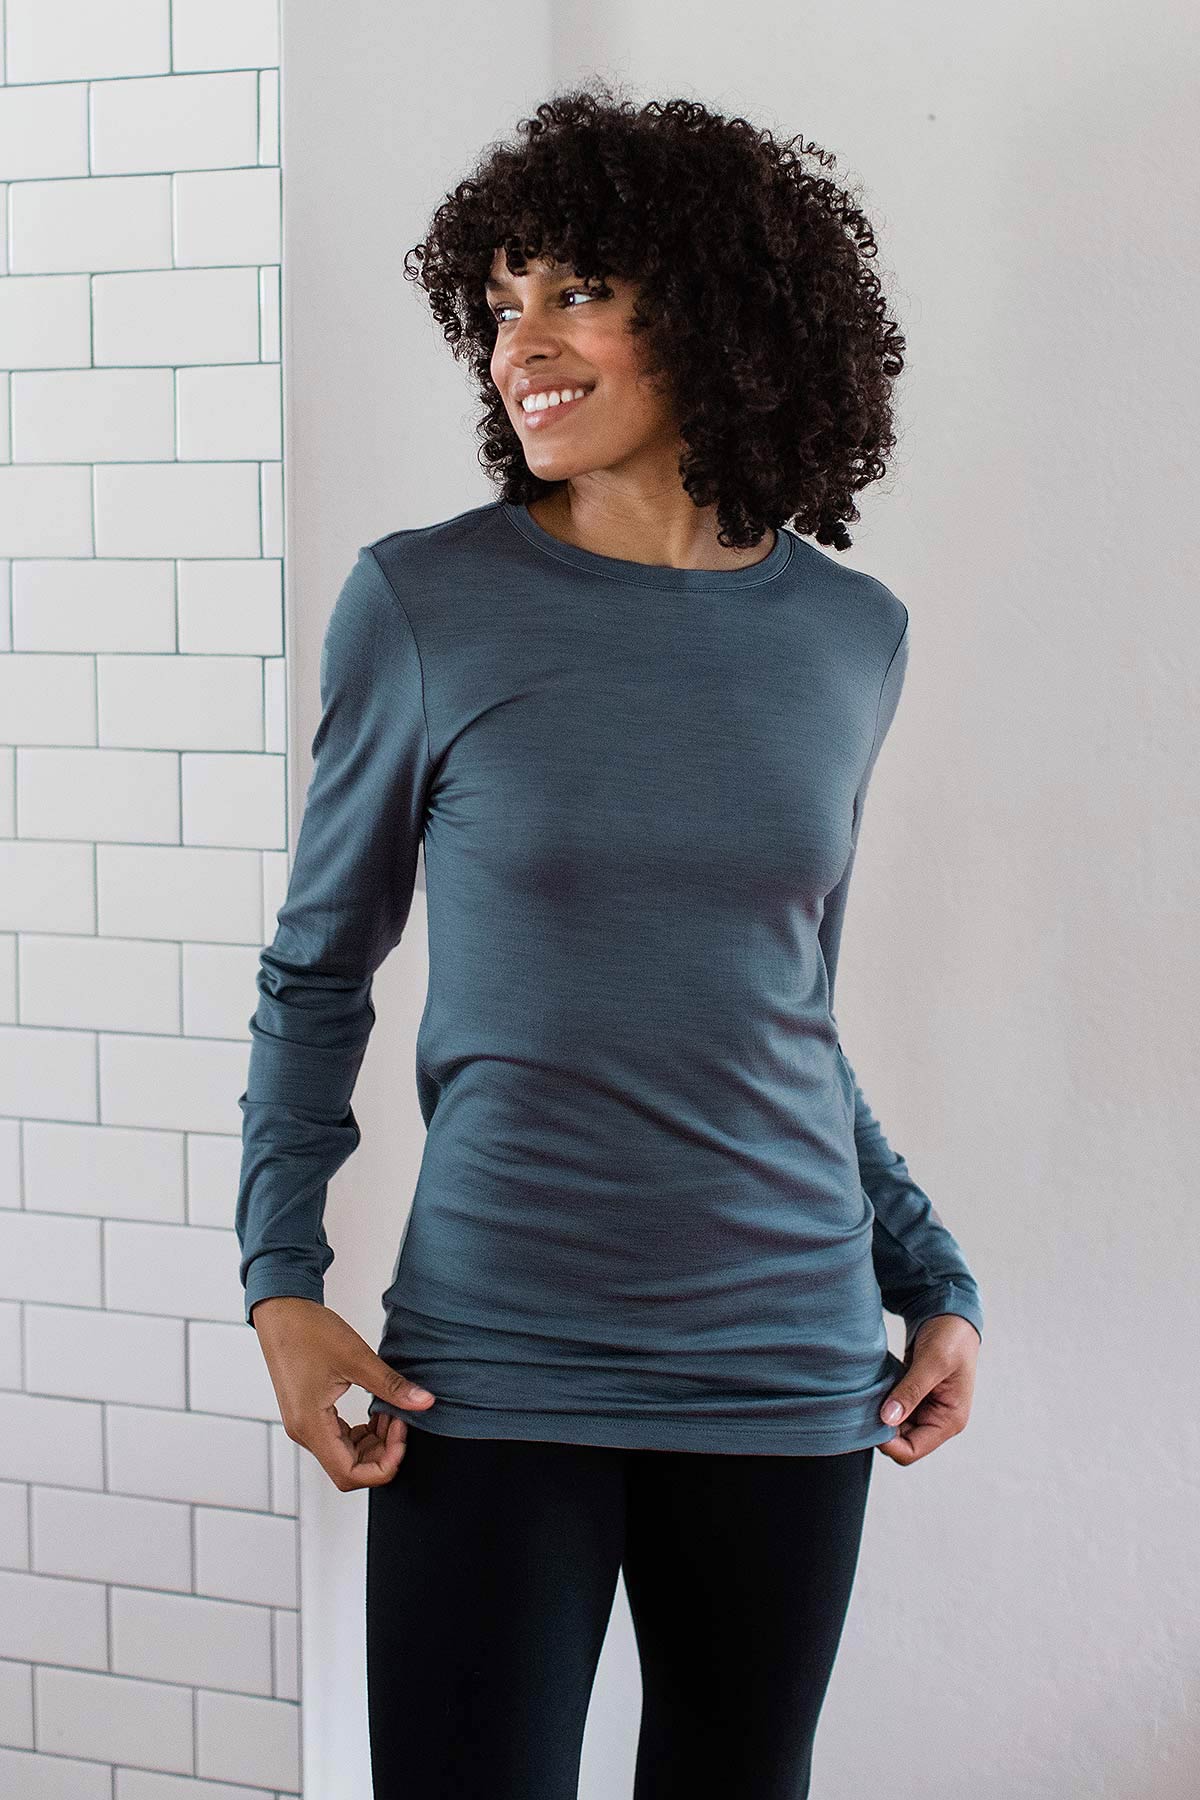 A woman standing and smiling while adjusting the edge of her top, wearing Yala Superfine Merino Wool Long Sleeve Top in Storm Grey